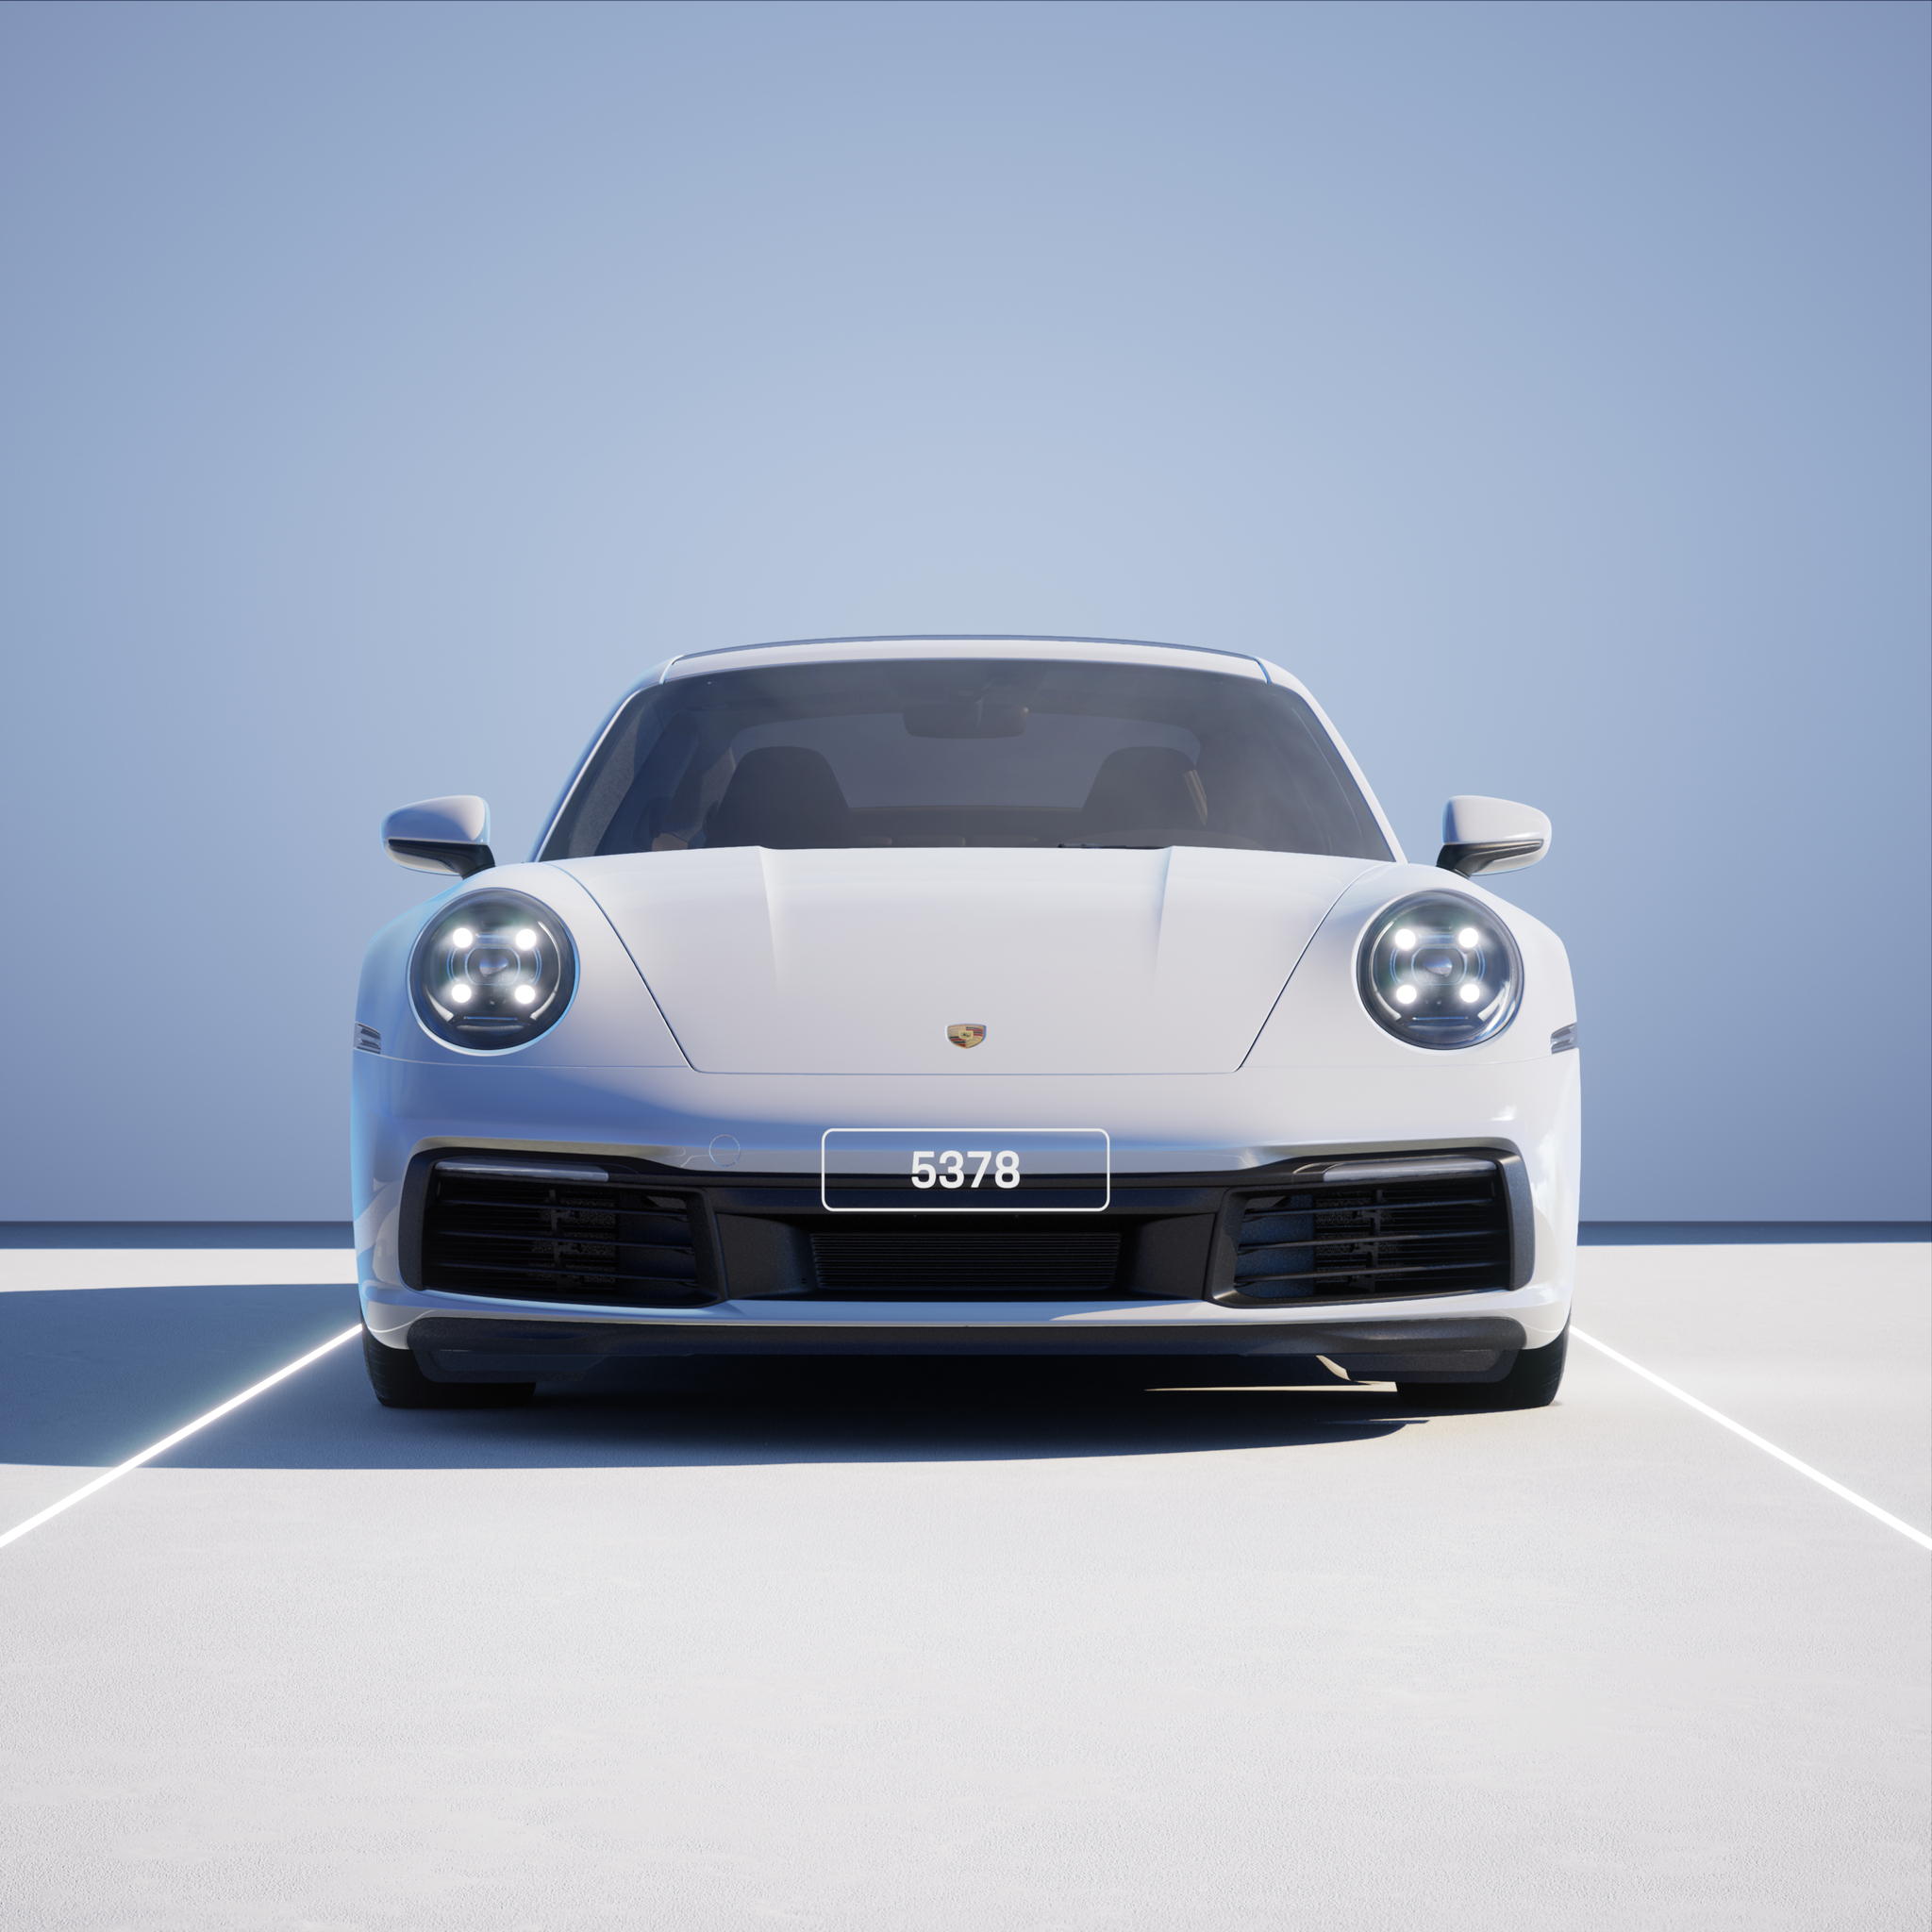 The PORSCHΞ 911 5378 image in phase